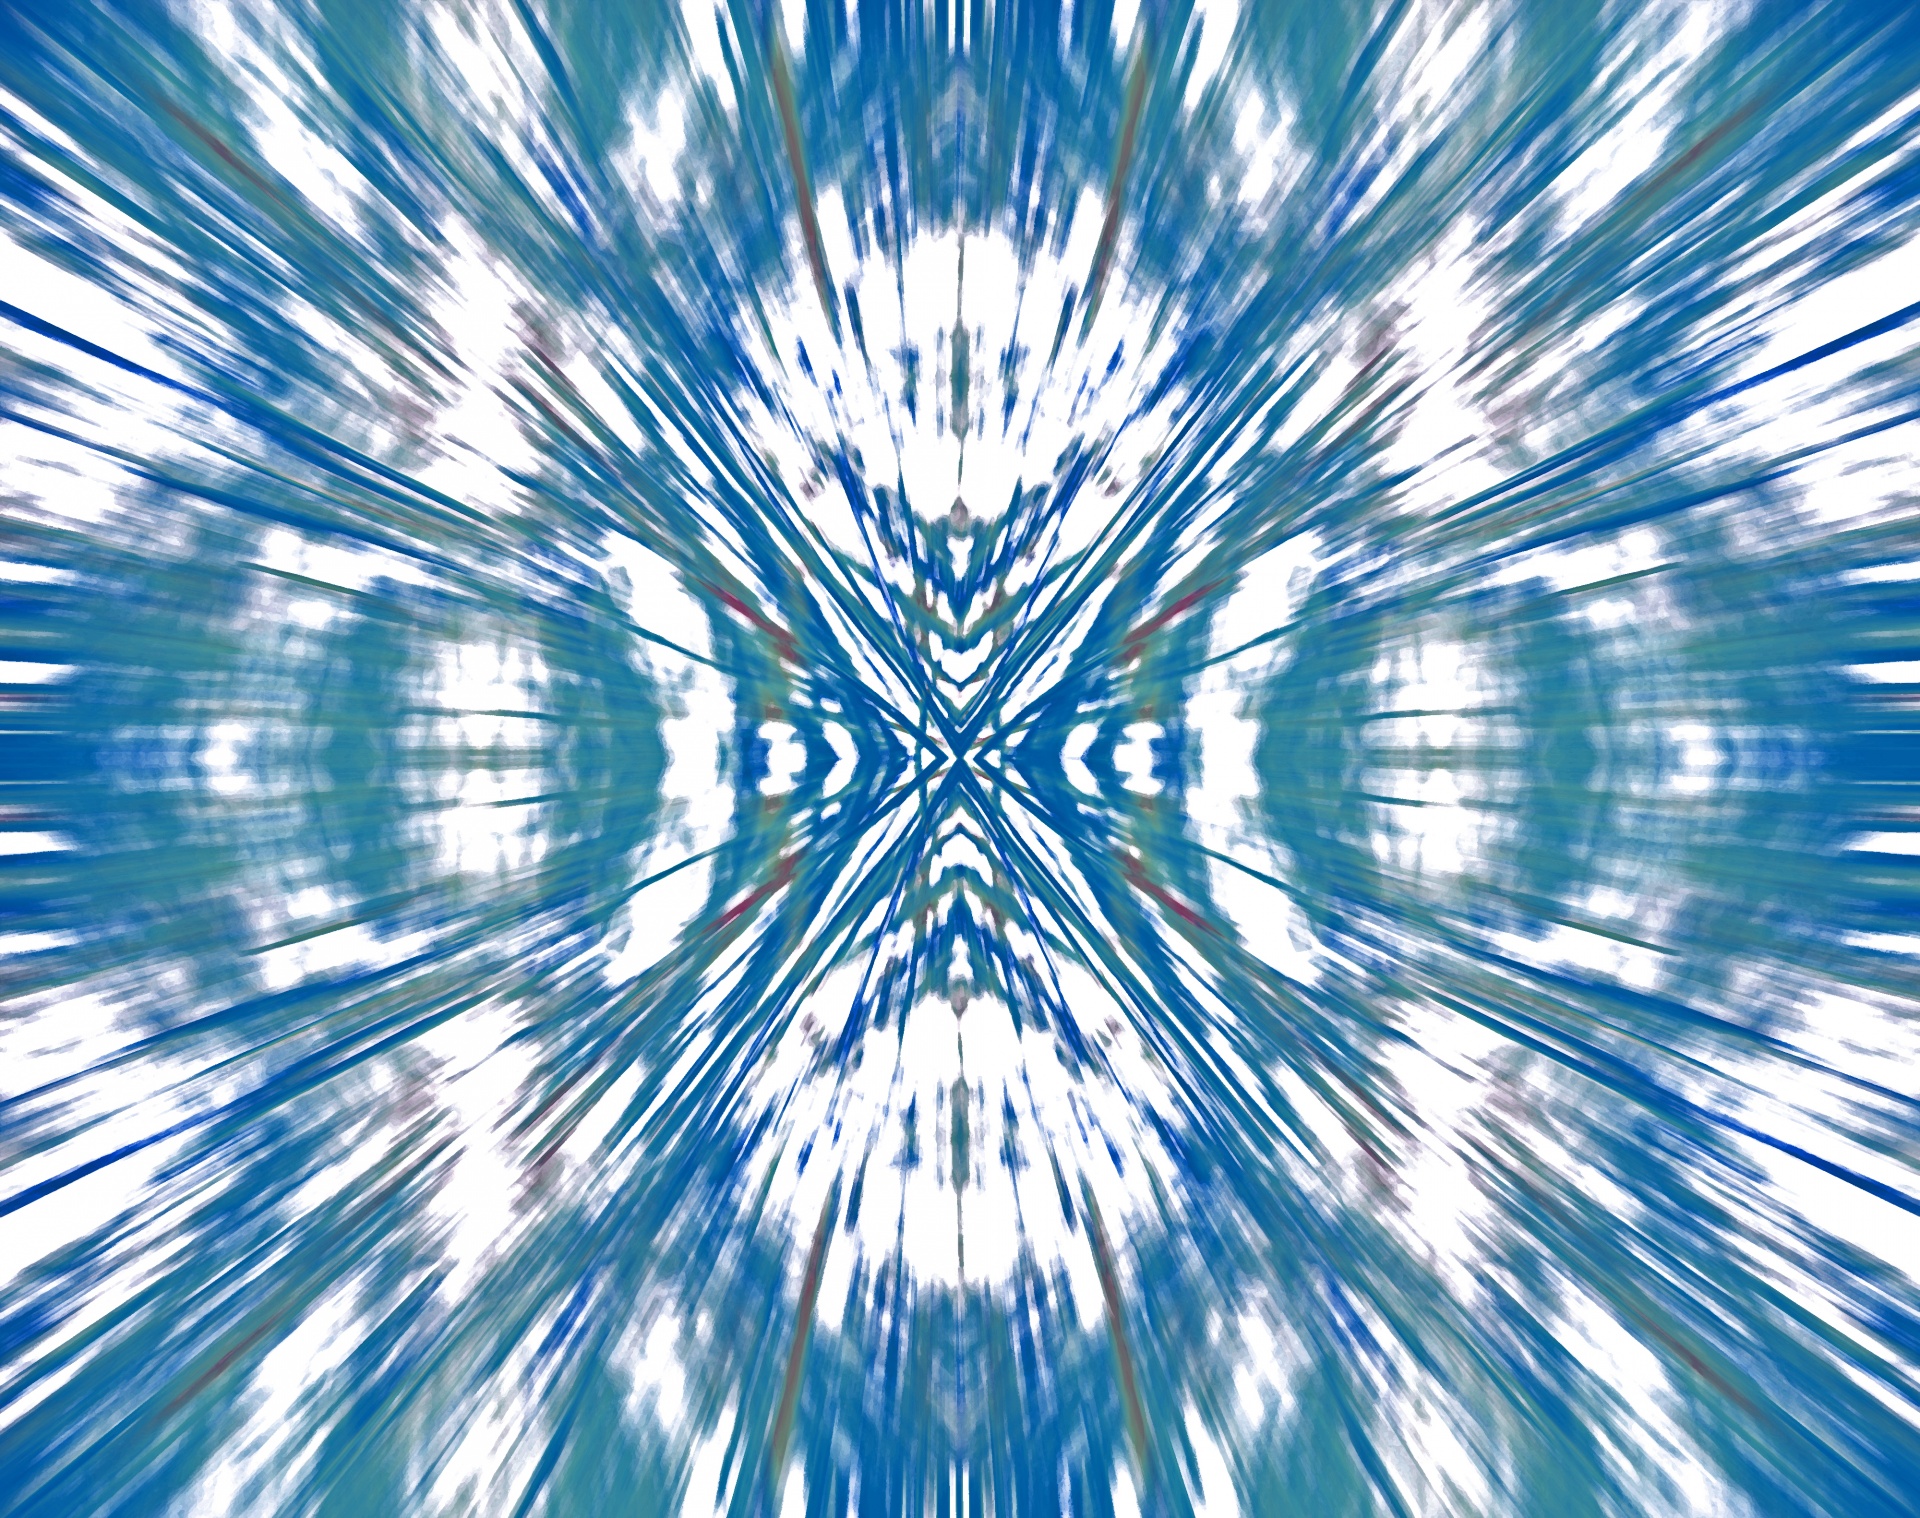 Blue And White Zoom Burst Effect